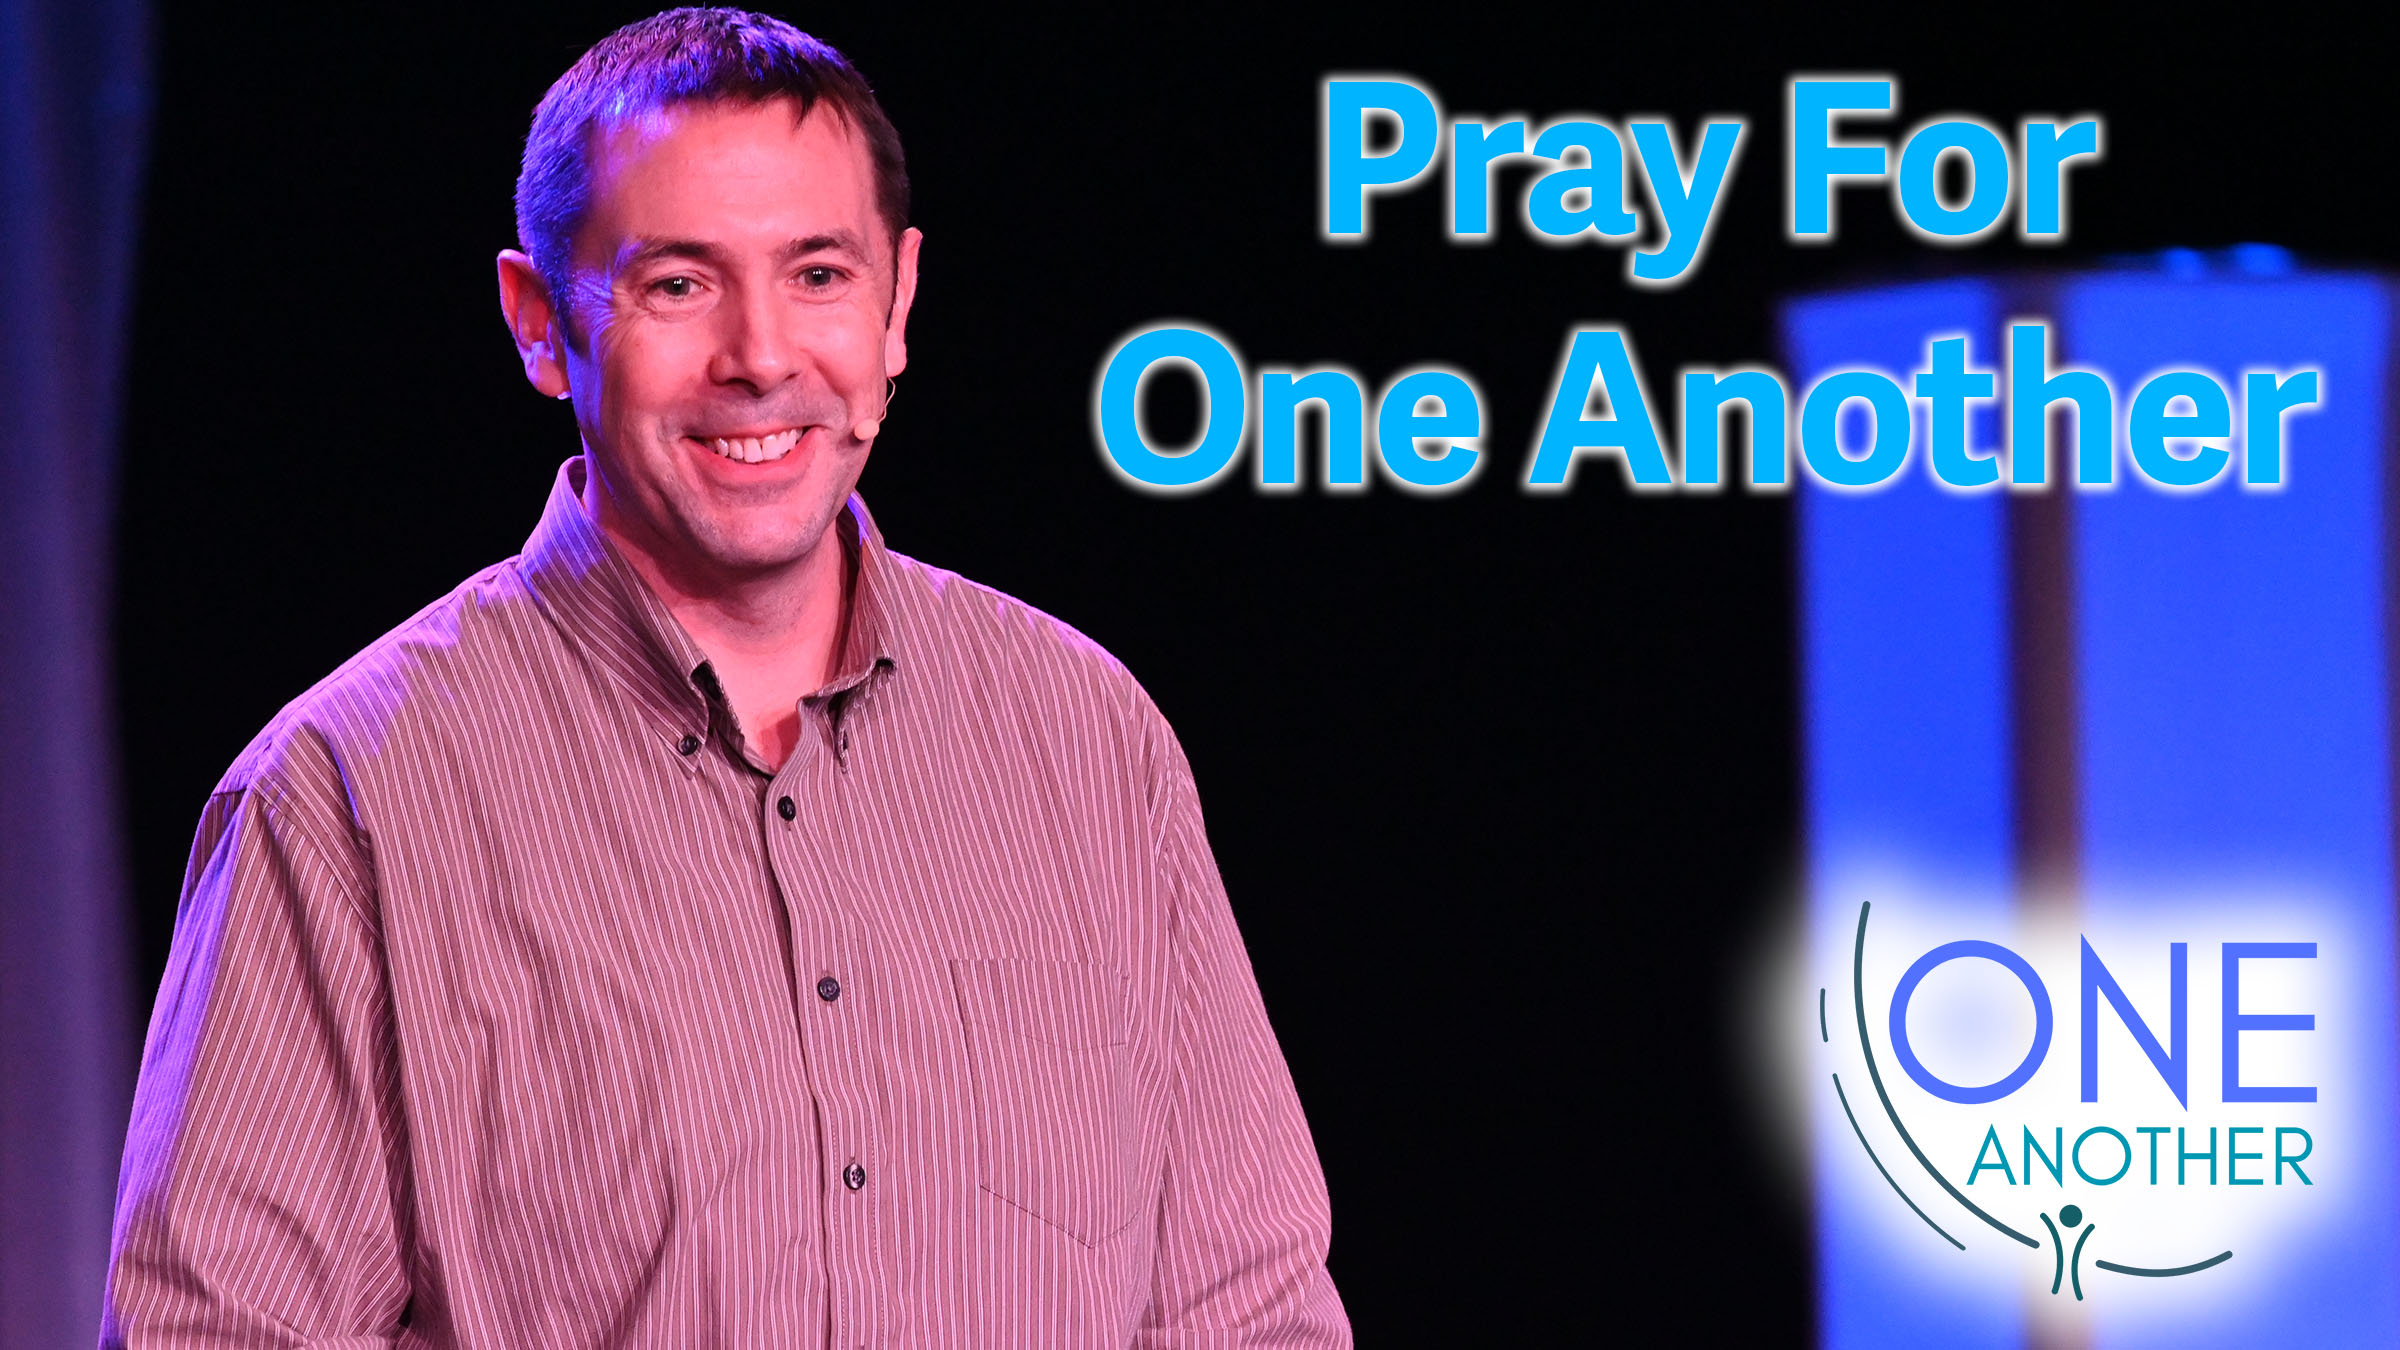 One Another - Pray For One Another